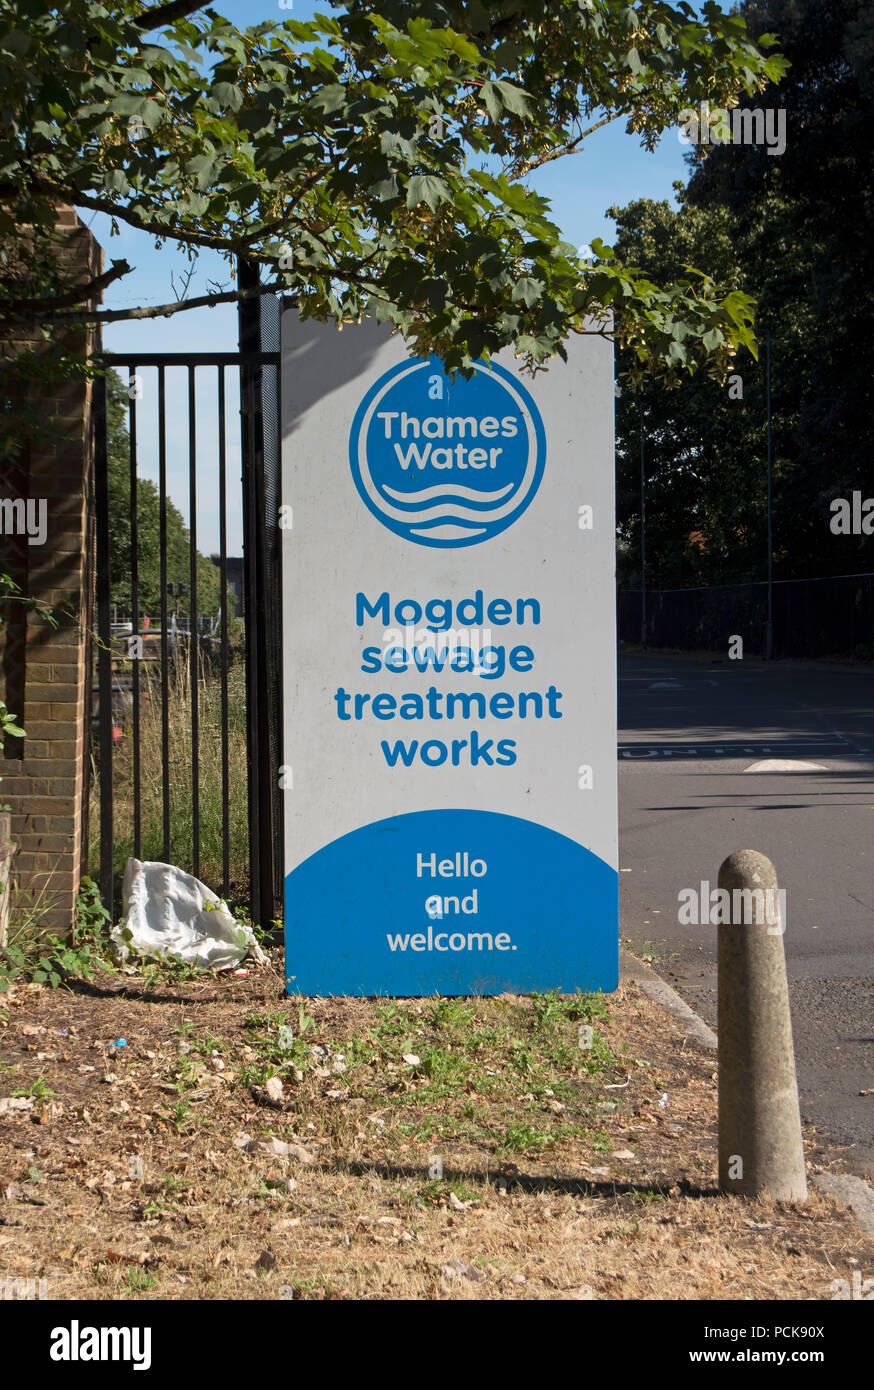 thames water entrance welcome sign at mogden sewage treatment works, isleworth, middlesex, england Stock Photo